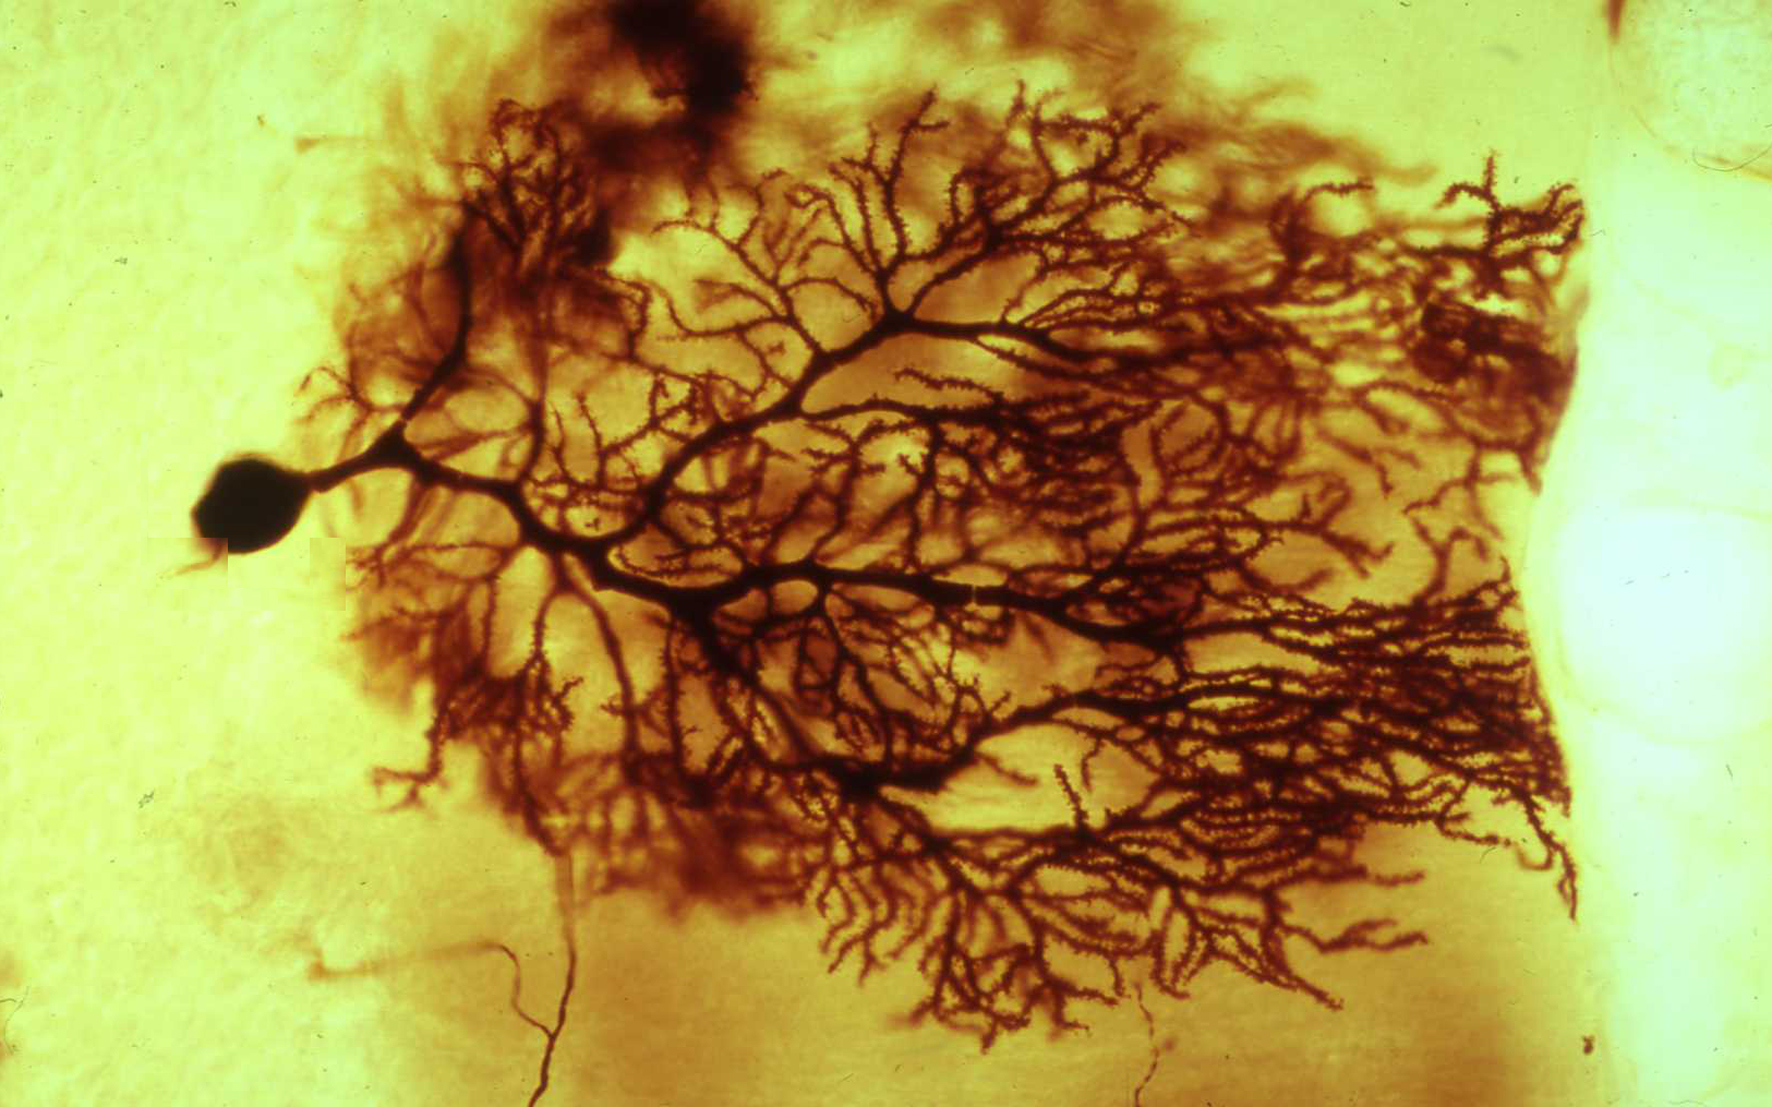 Microscopy image of a nerve cell, or neuron, from the cortex of the cerebellum, courtesy of Dr R W Banks.